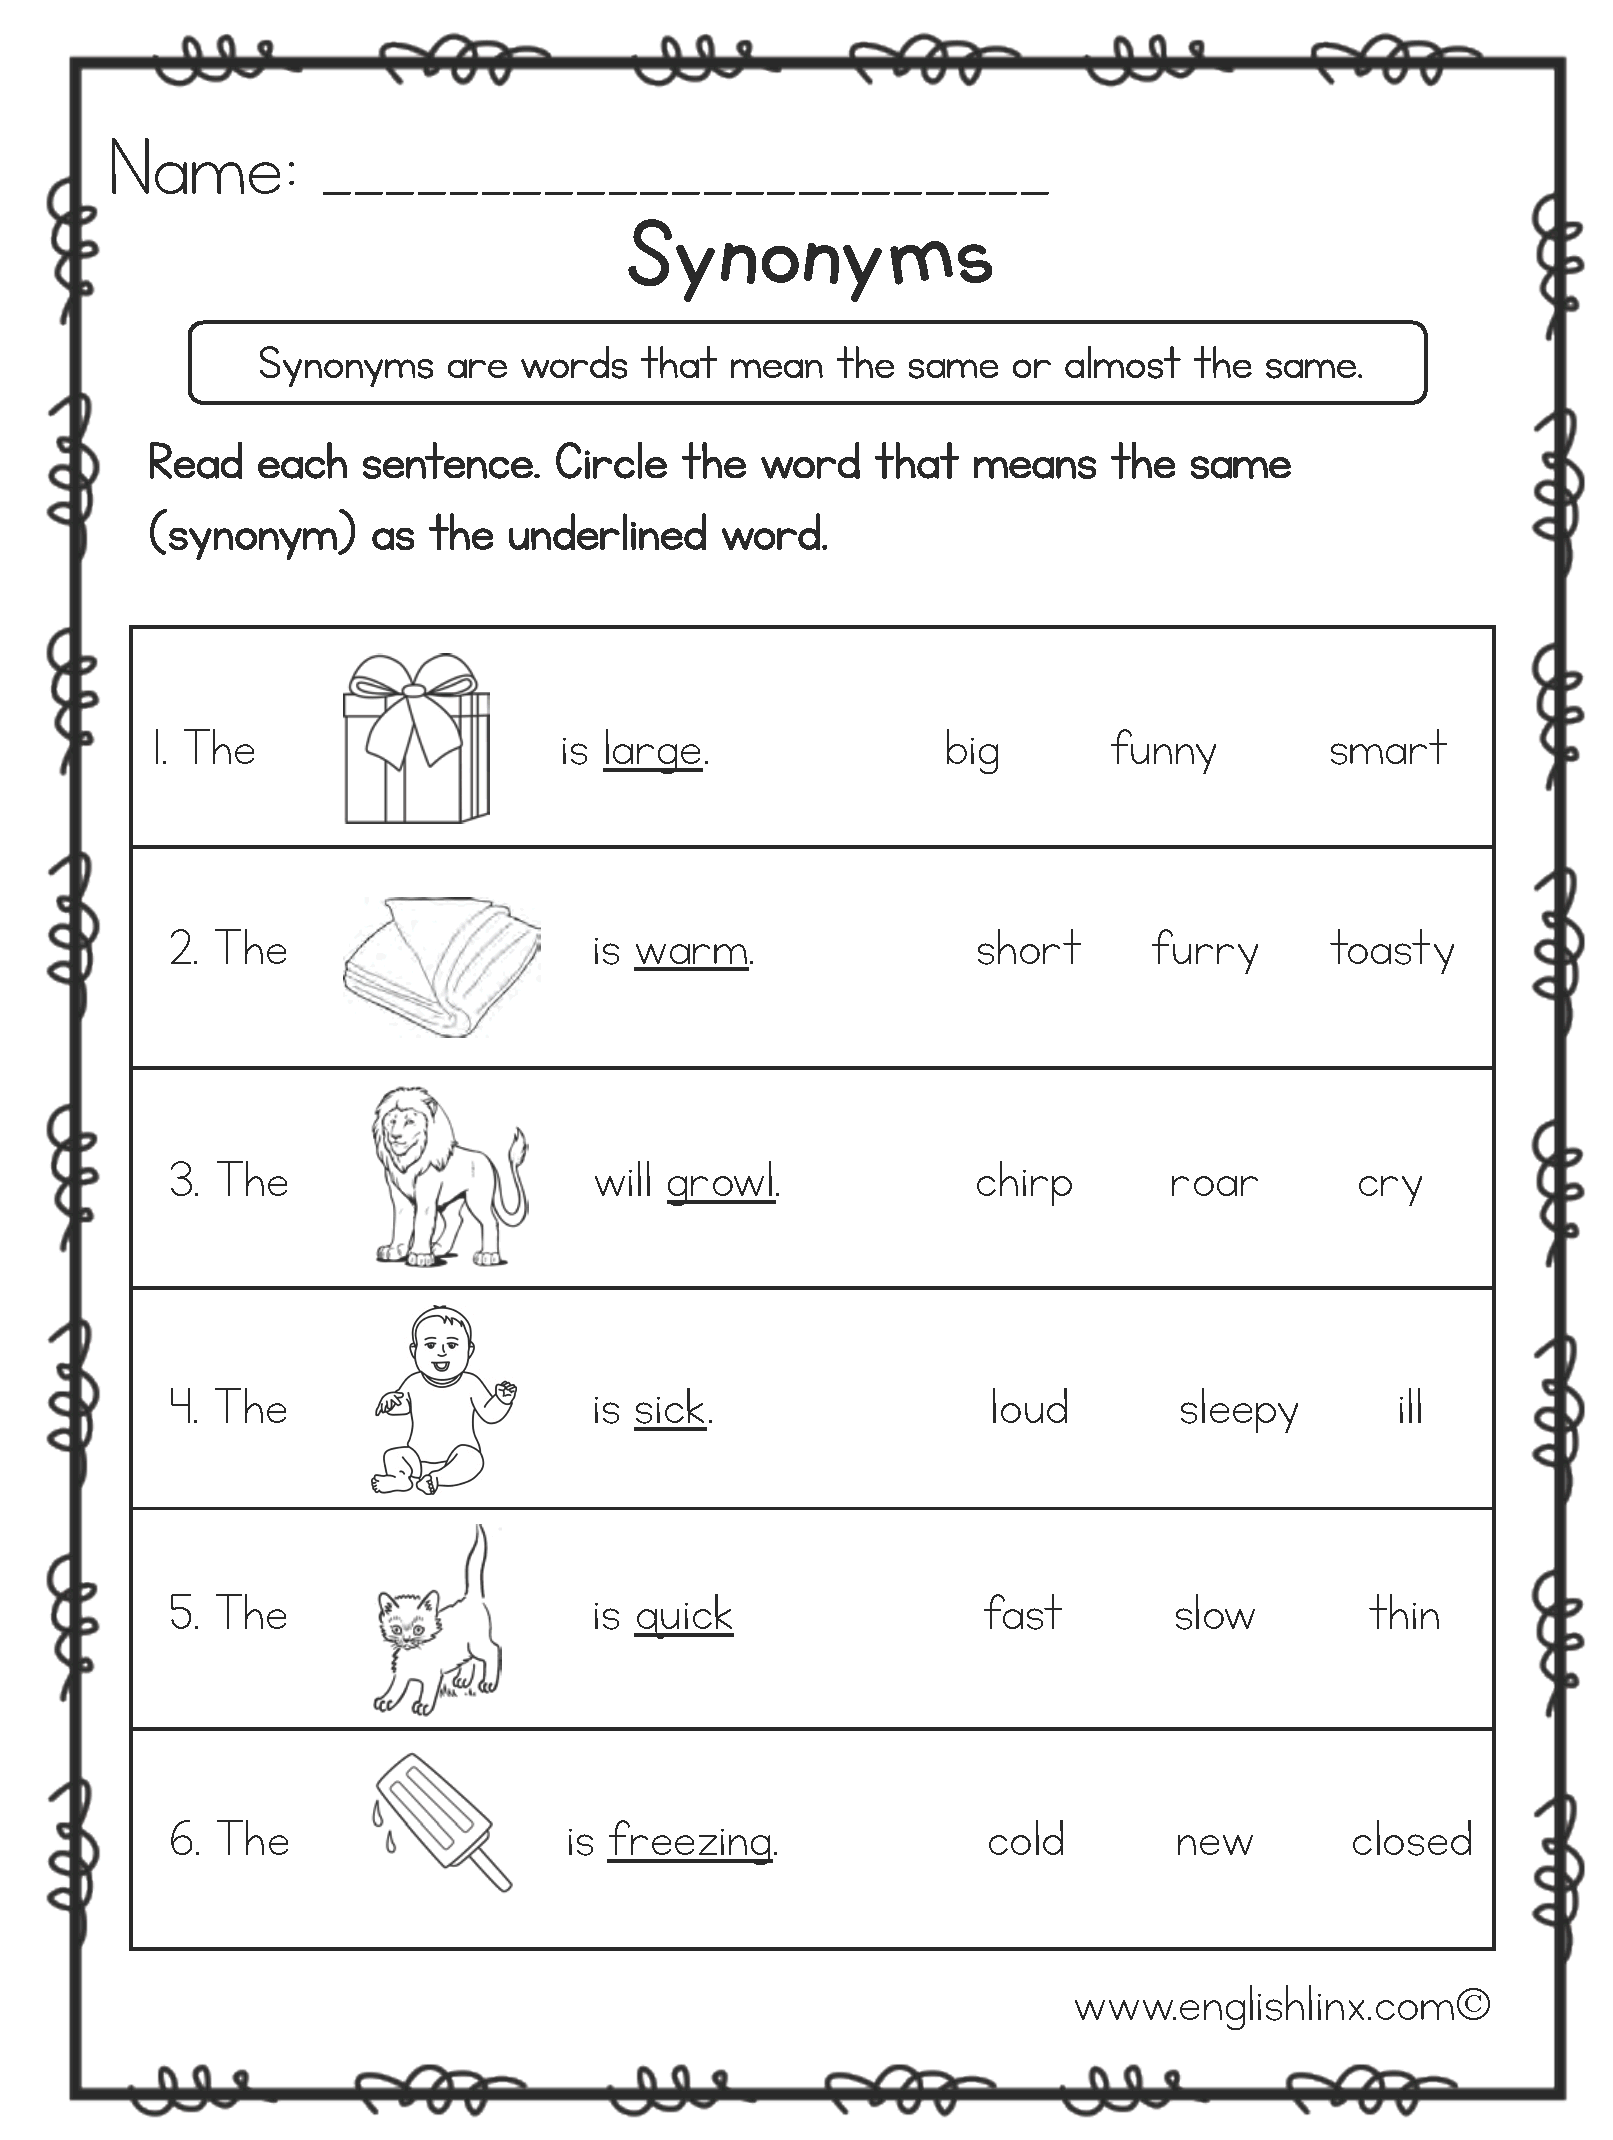 Similar Meanings Synonyms Worksheets